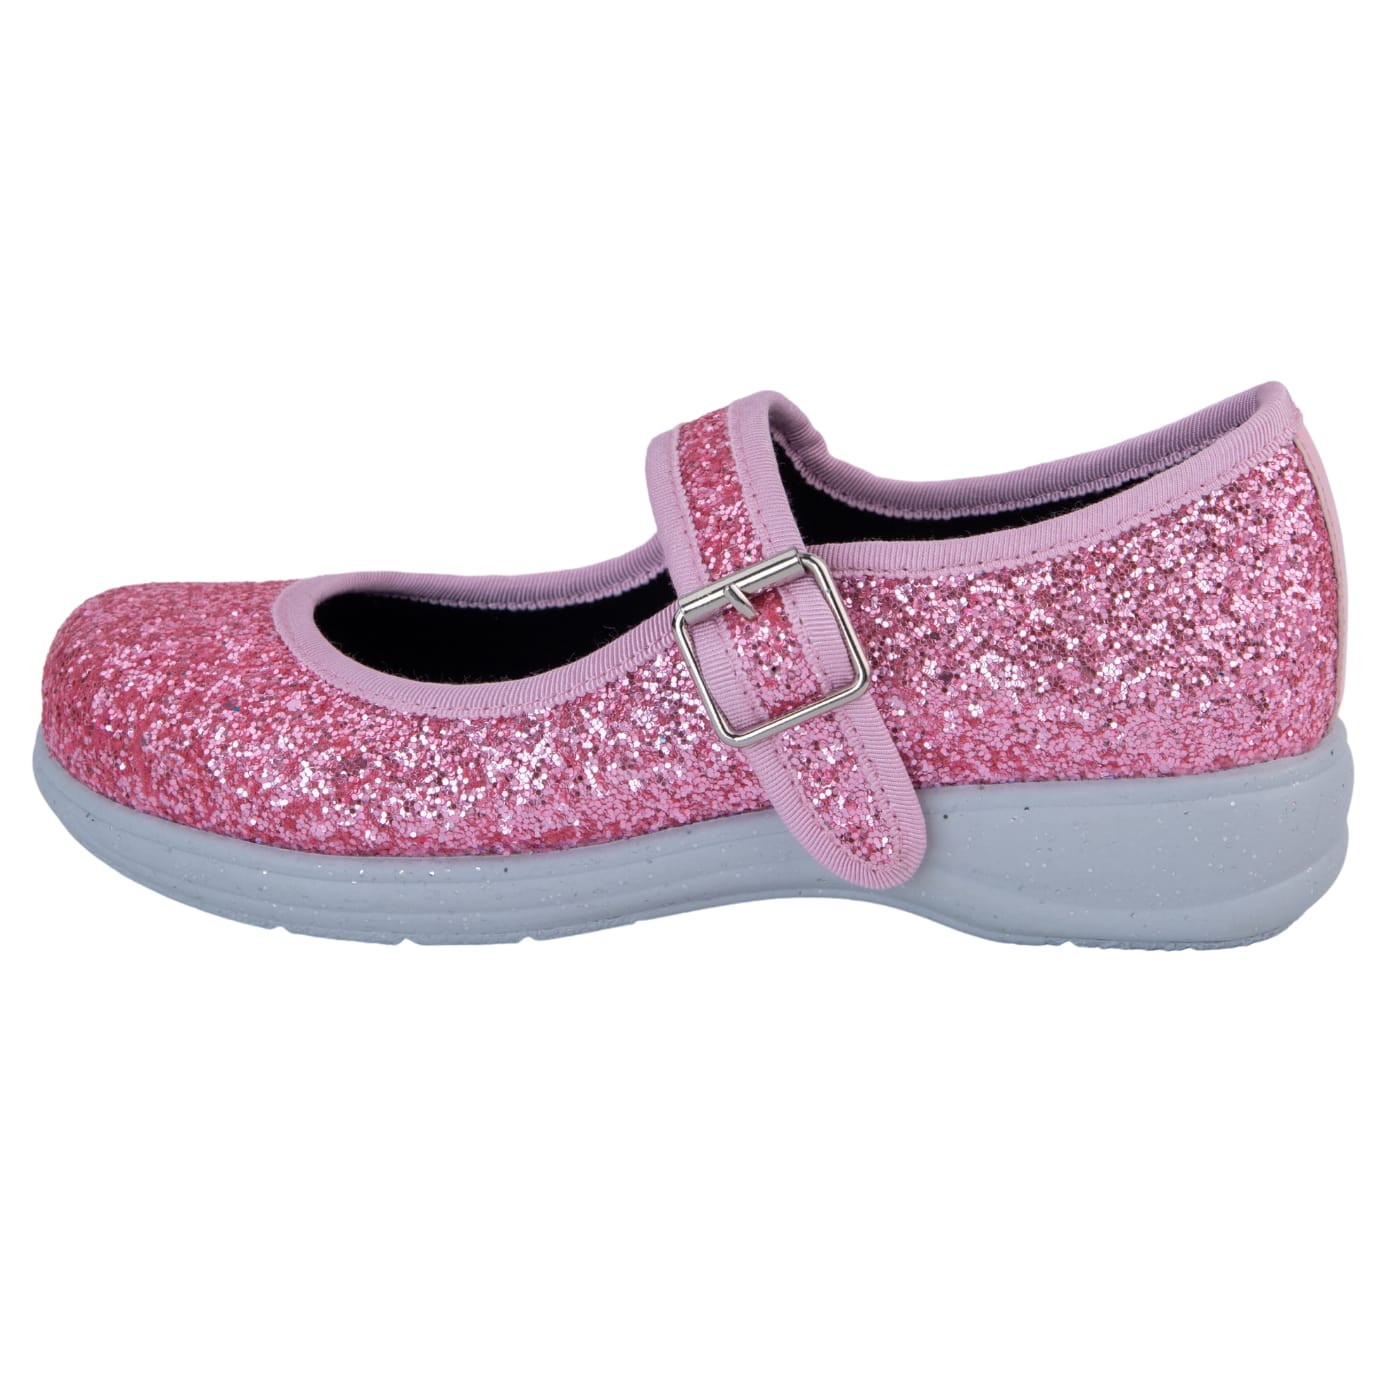 Fairy Floss Mary Janes by RainbowsAndFairies.com.au (Pink Glitter - Glitter Soles - Mismatched Shoes - Glitter Shoes - Sparkle) - SKU: FW_MARYJ_FRYFL_ORG - Pic-03